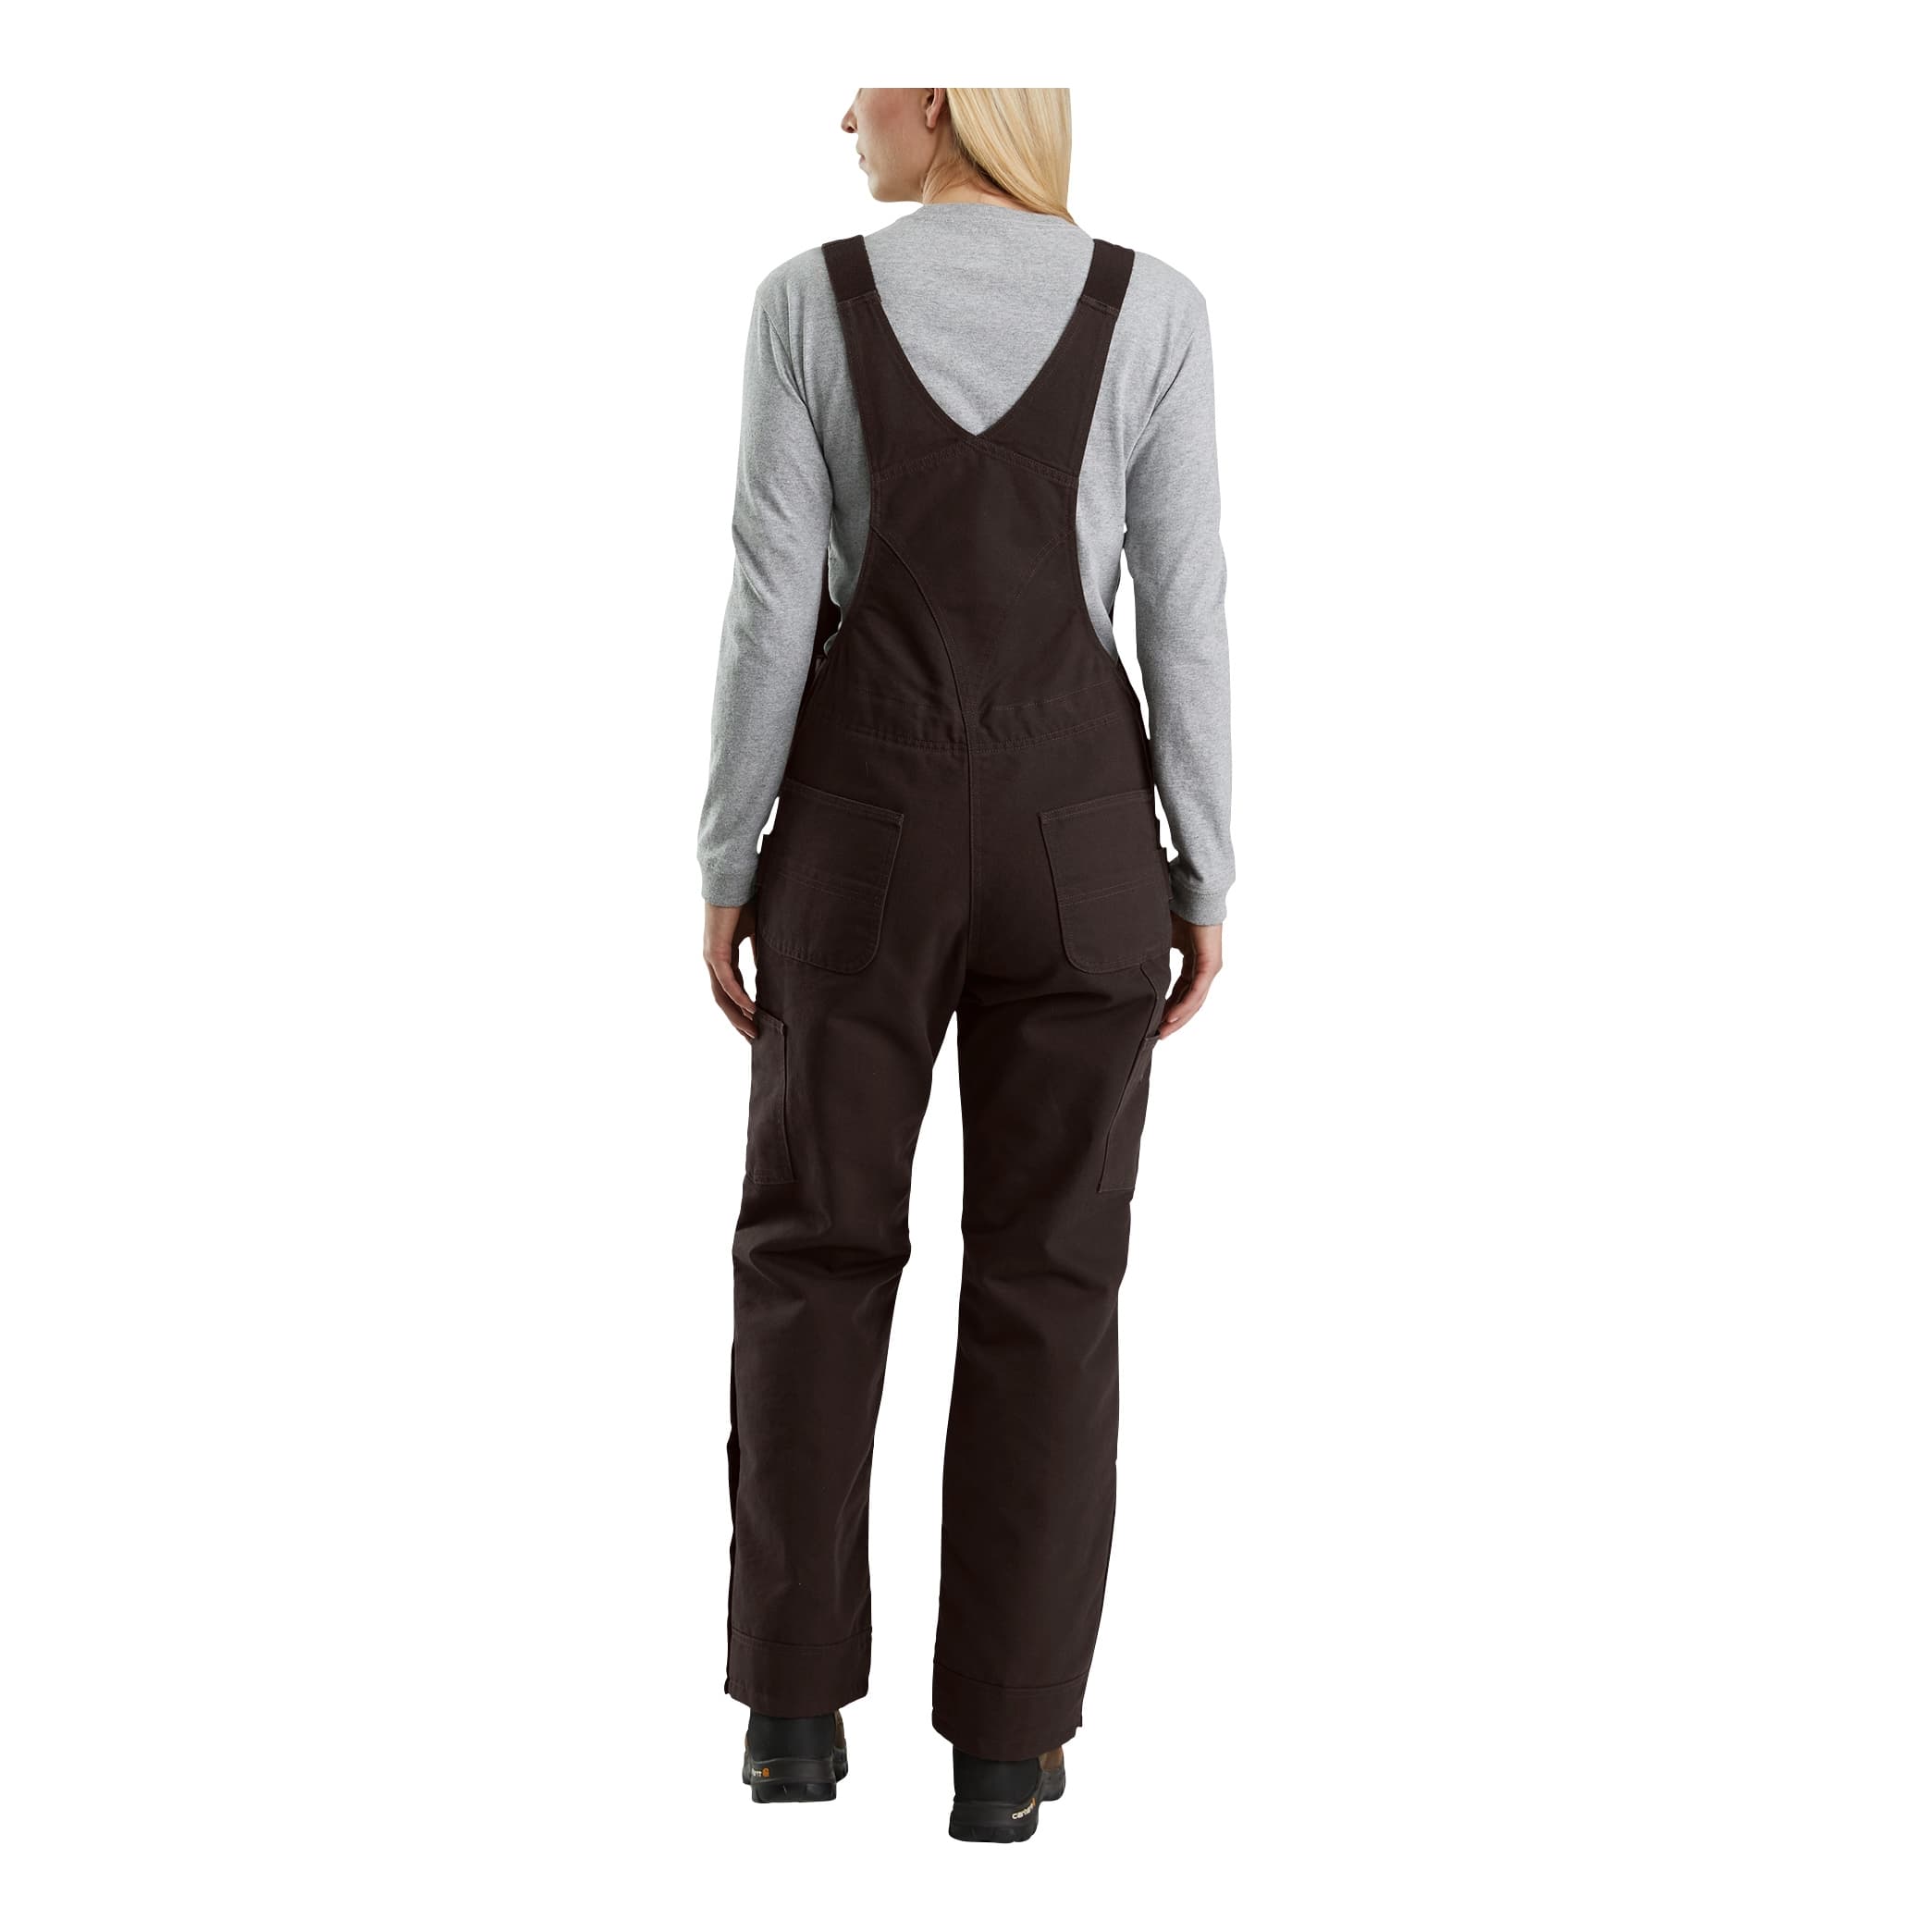 Carhartt® Women's Relaxed Fit Washed Duck Insulated Bib Overall